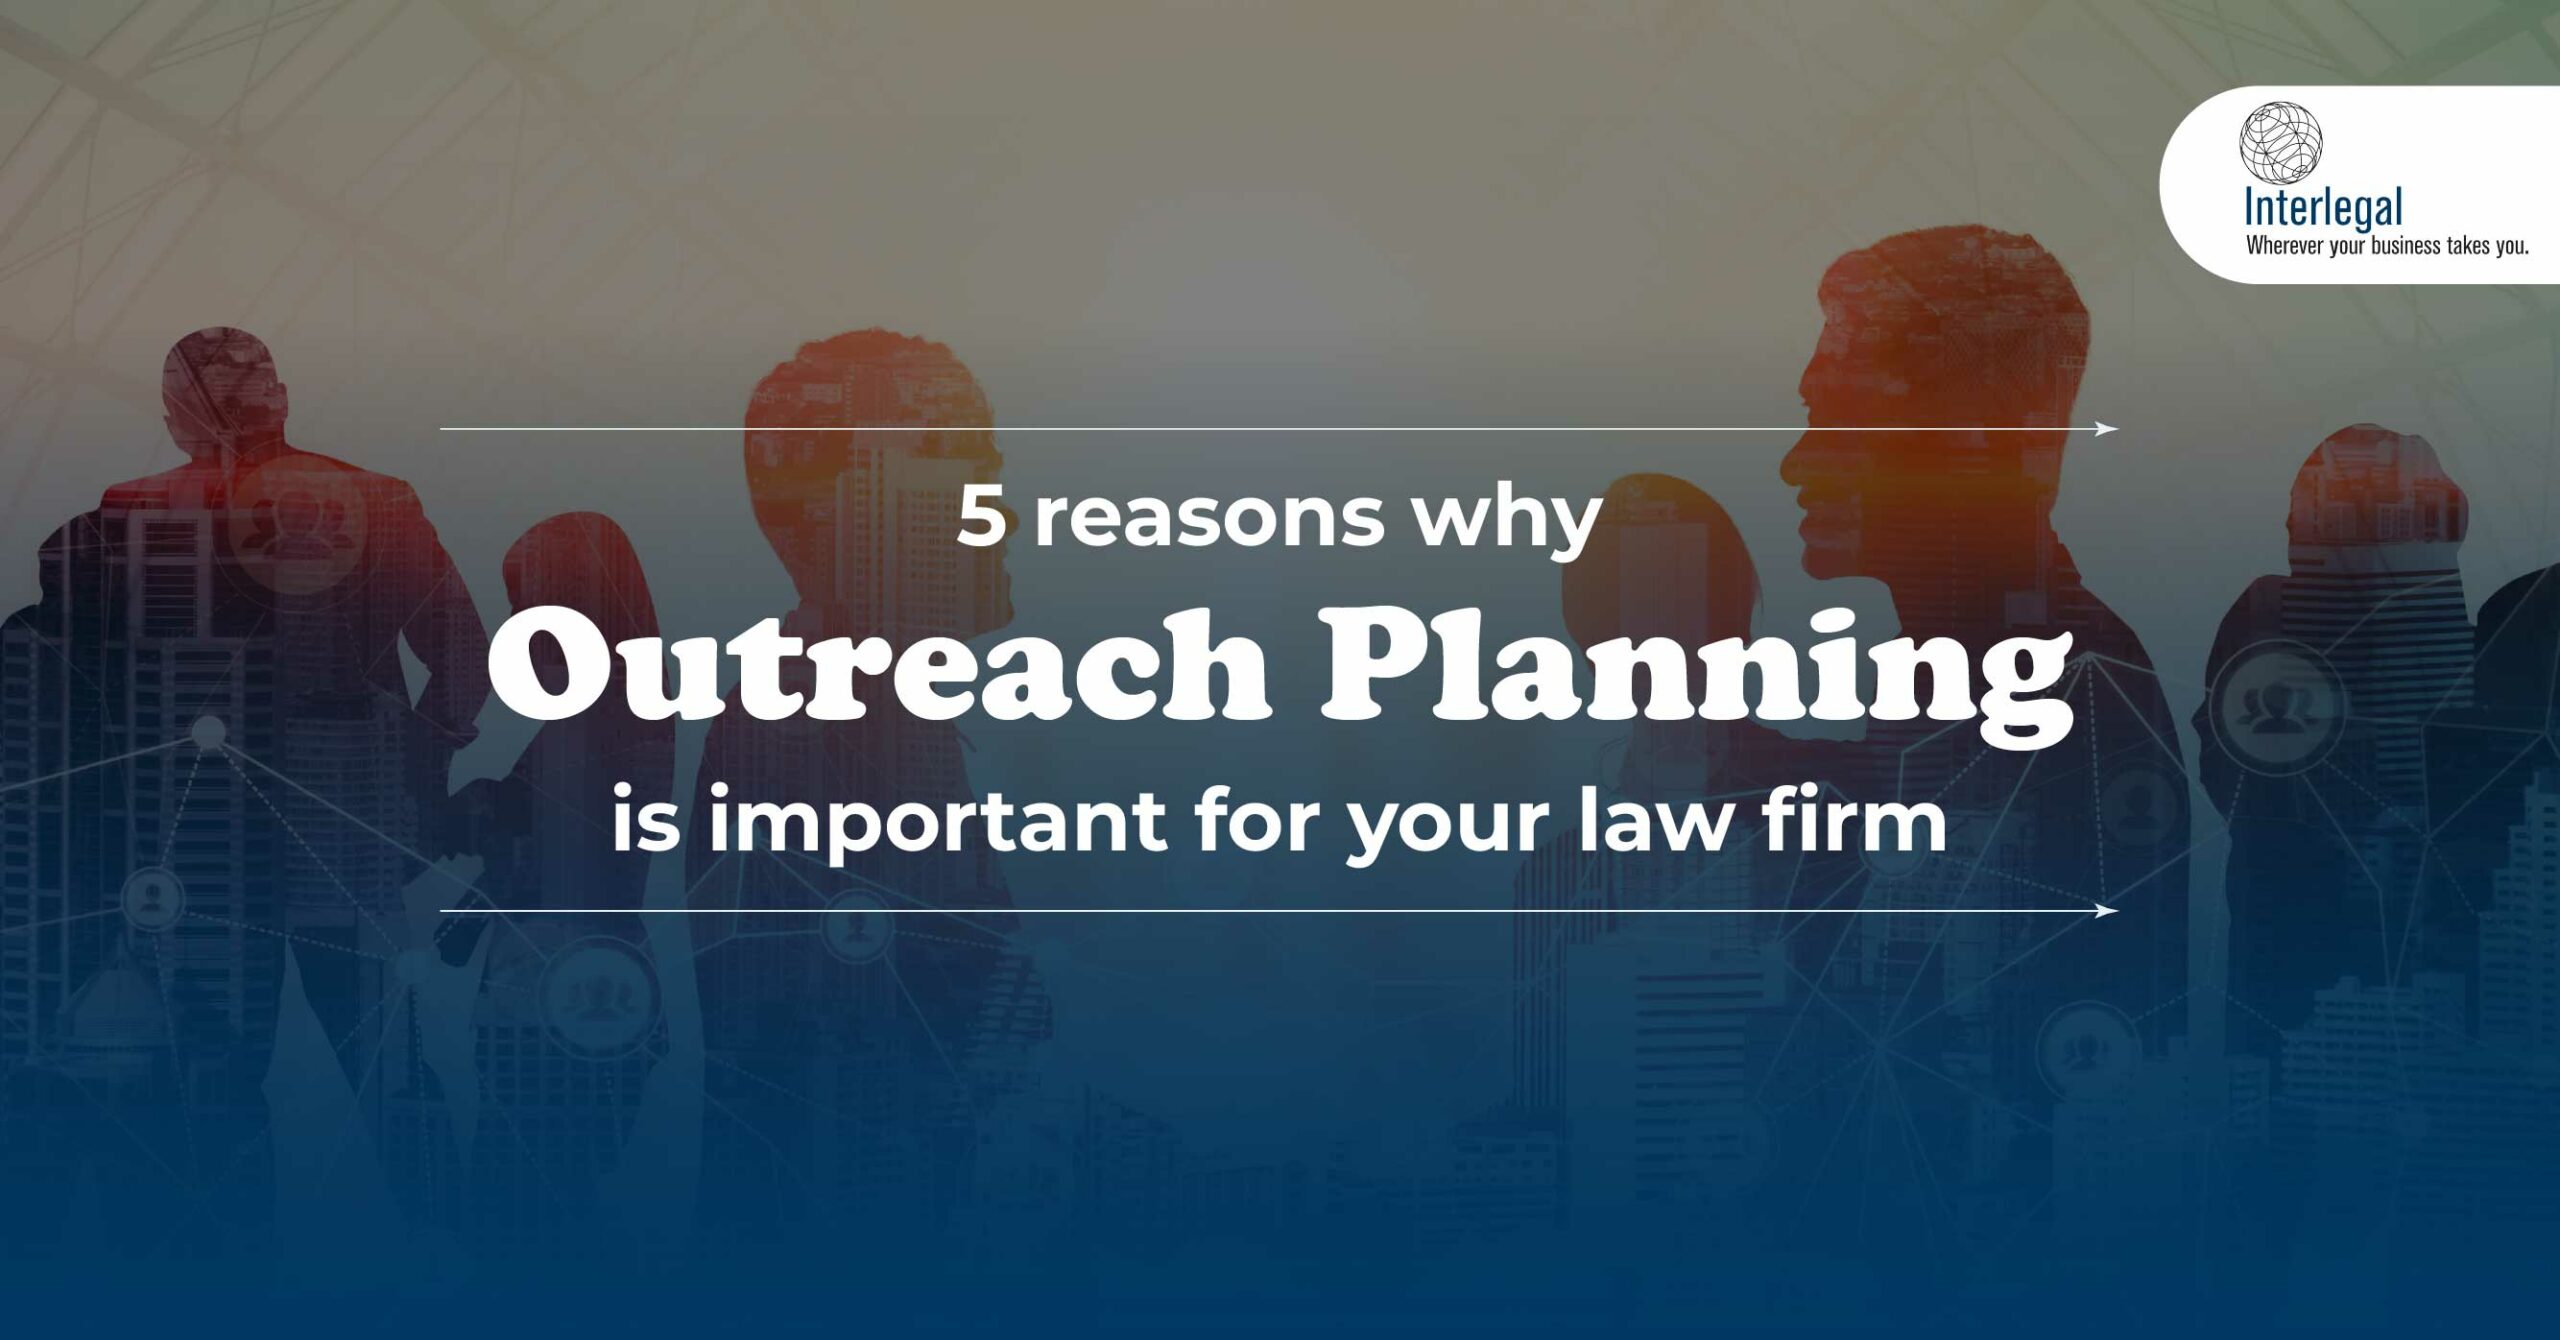 5 Reasons why Outreach Planning is important for your Law Firm